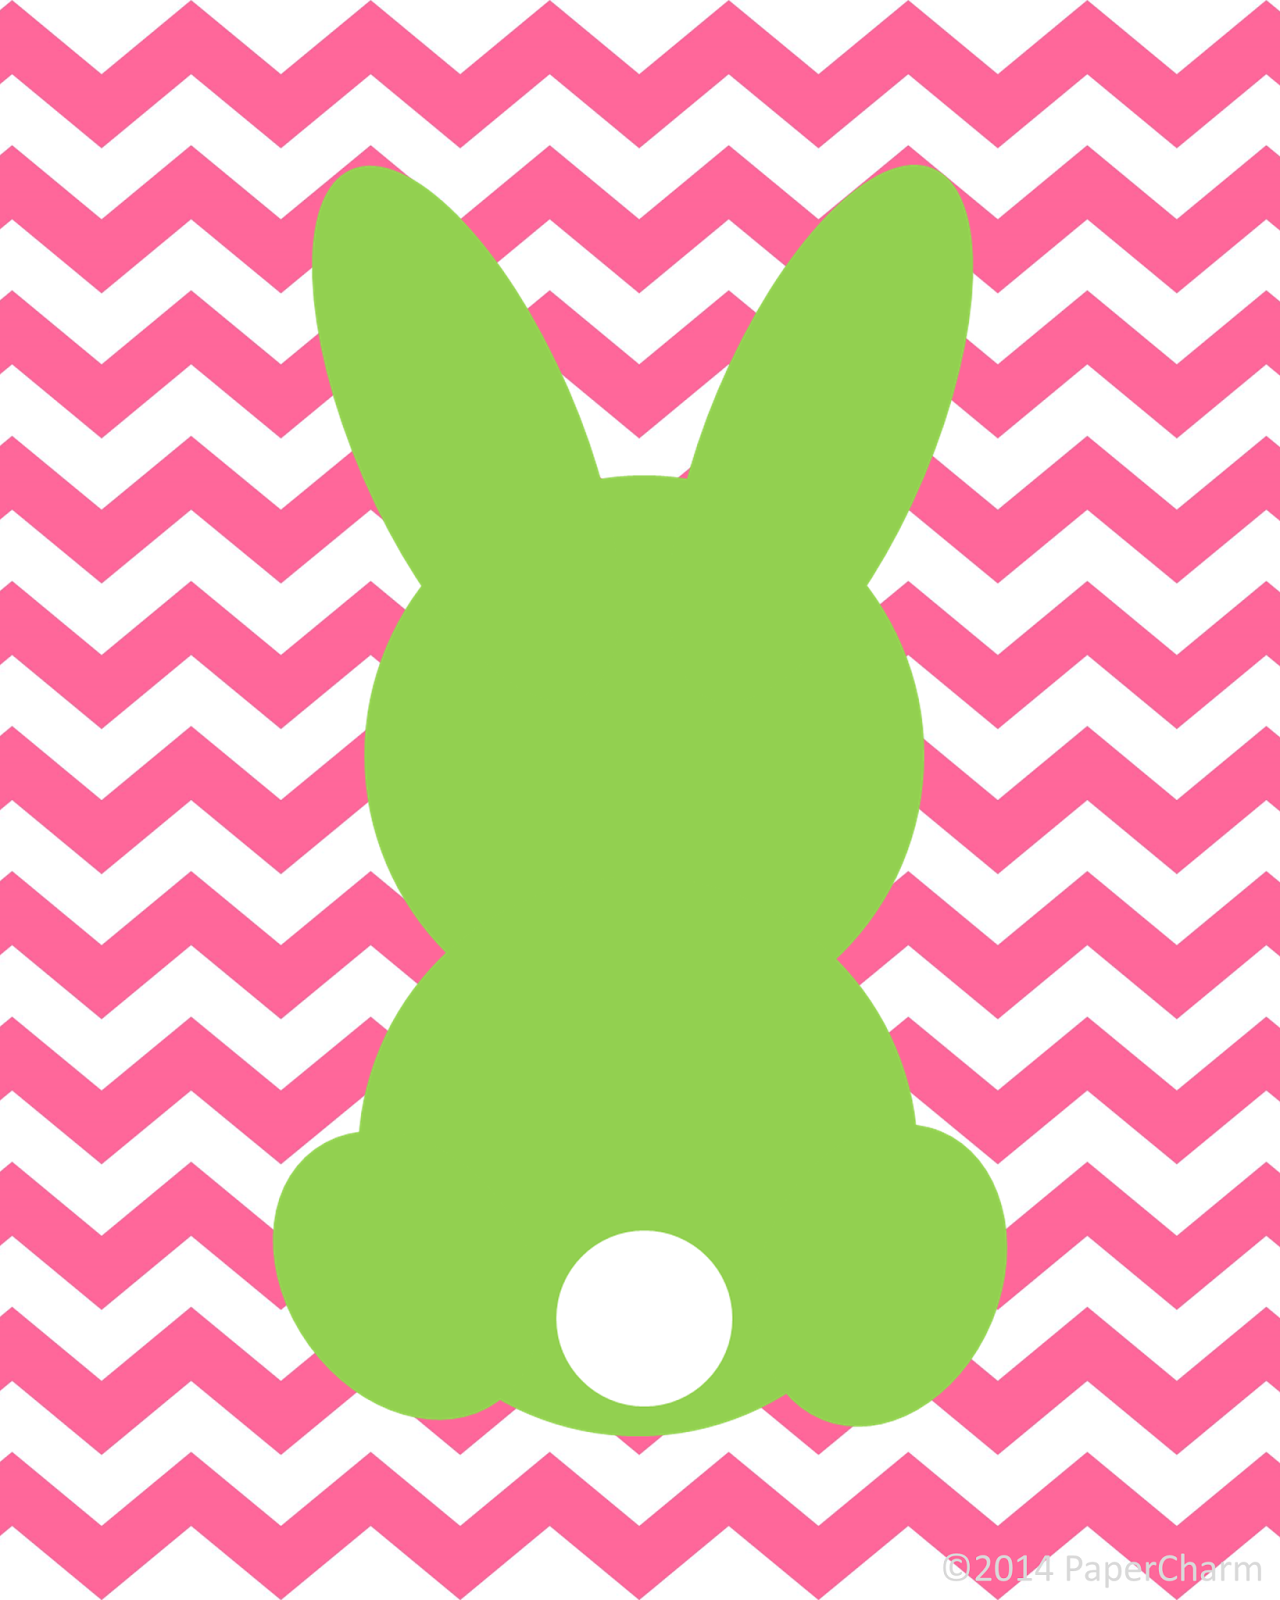 papercharm-free-bunny-silhouette-easter-printable-art